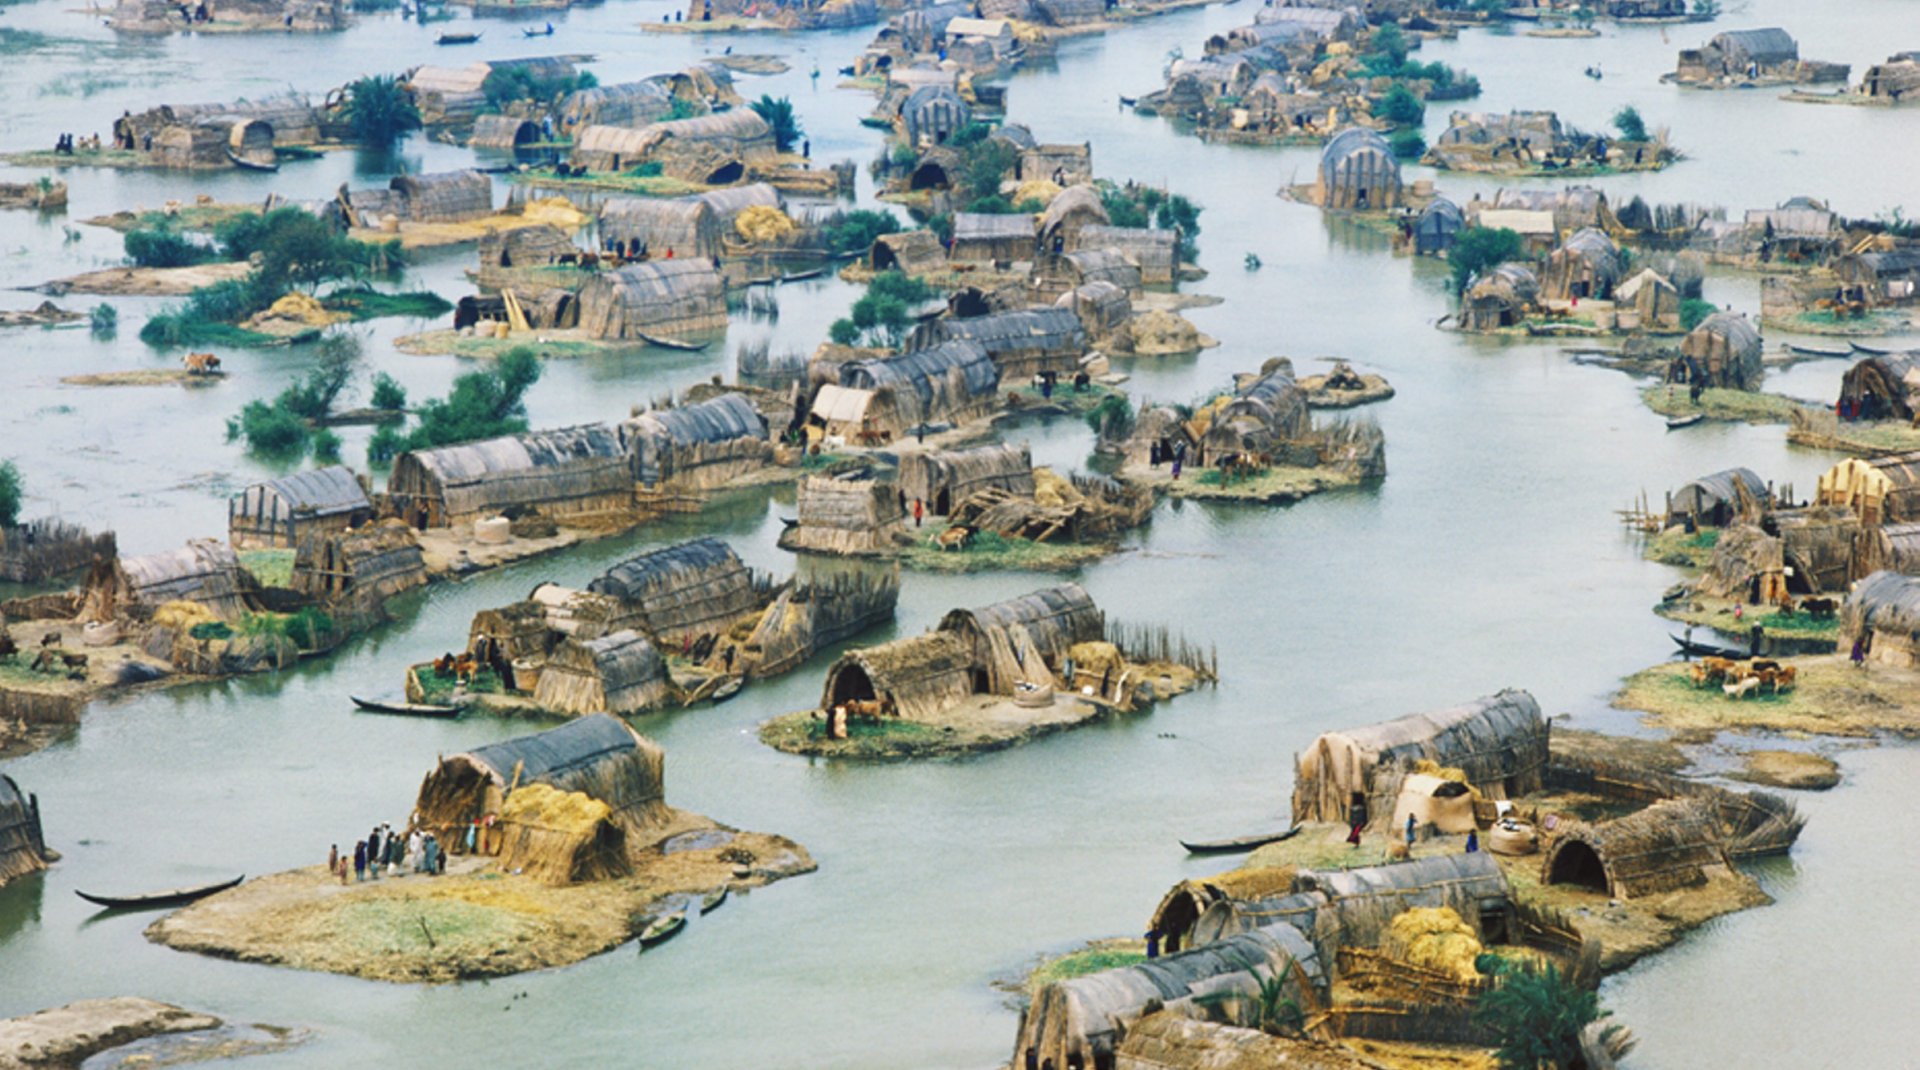 A drone shot of houses in the Mesopotamian Marshes Iraq